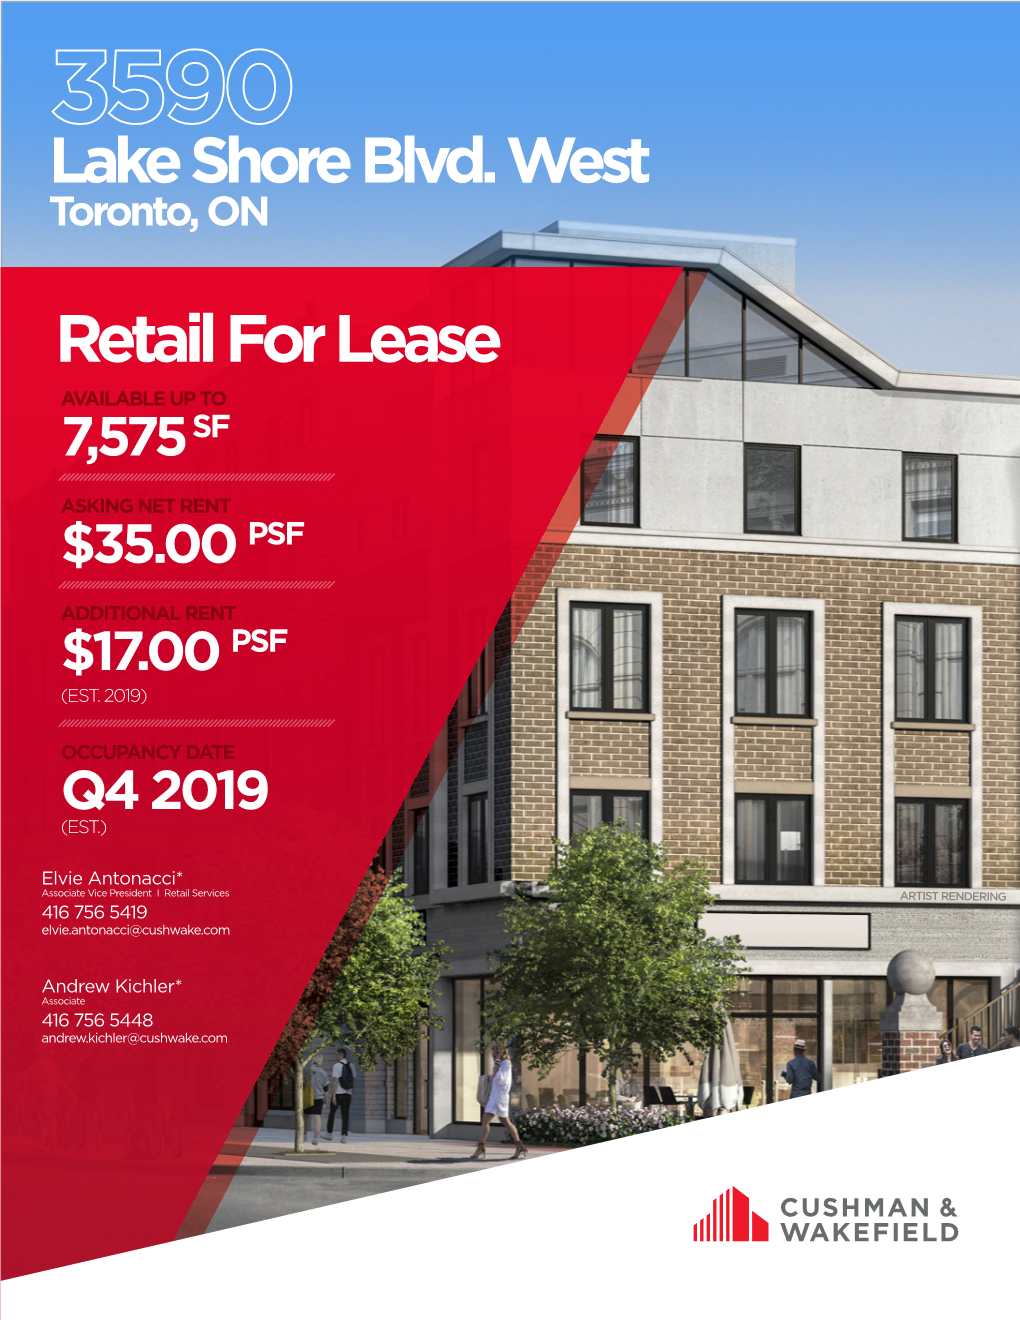 Retail for Lease AVAILABLE up to SF 7,575